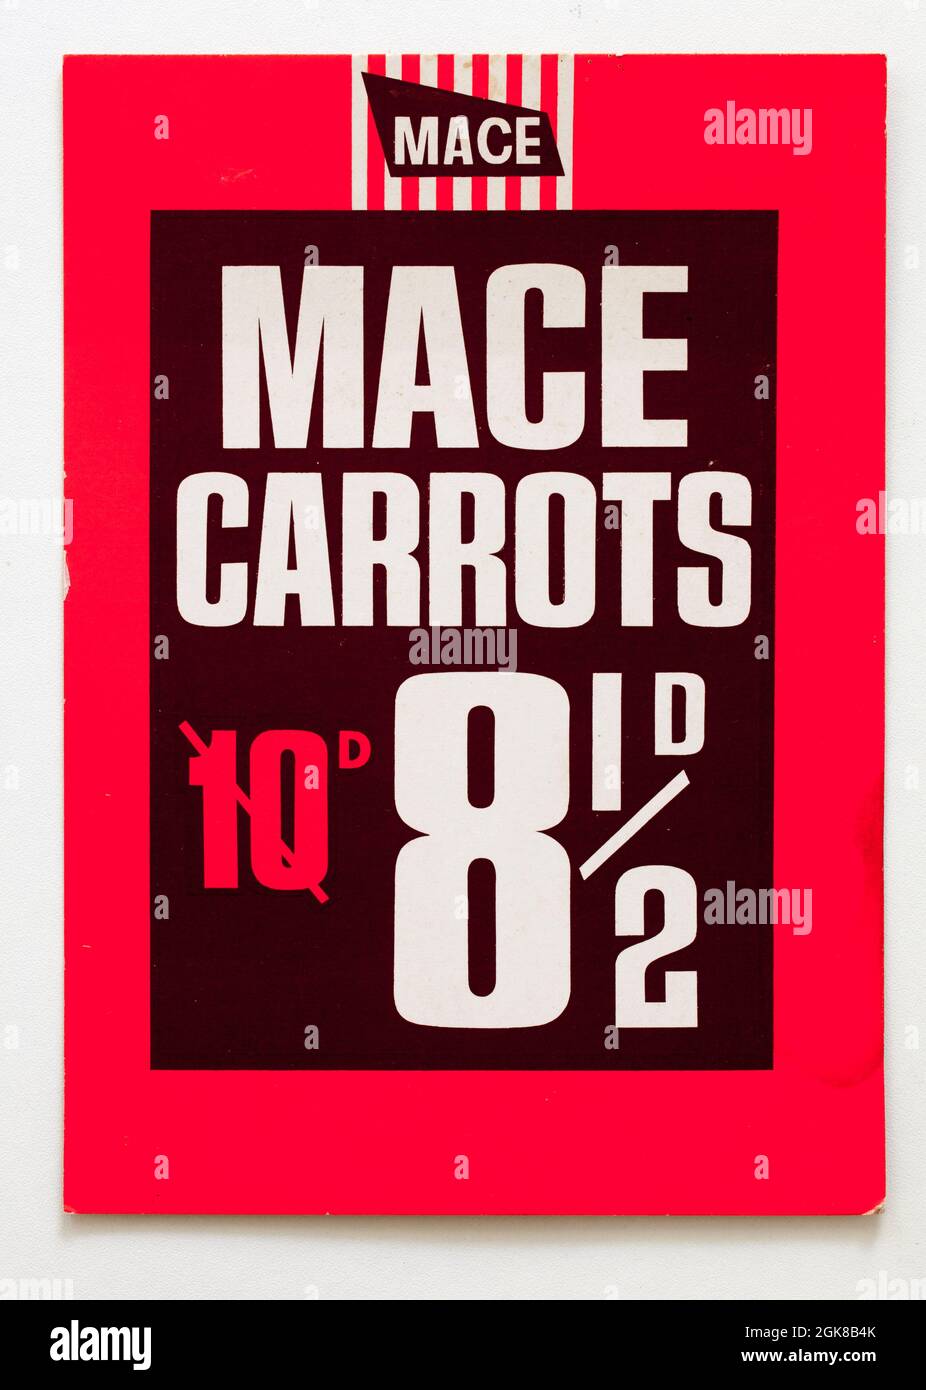 Vintage 1960s Mace Shop Price Display Card - Carrots Stock Photo